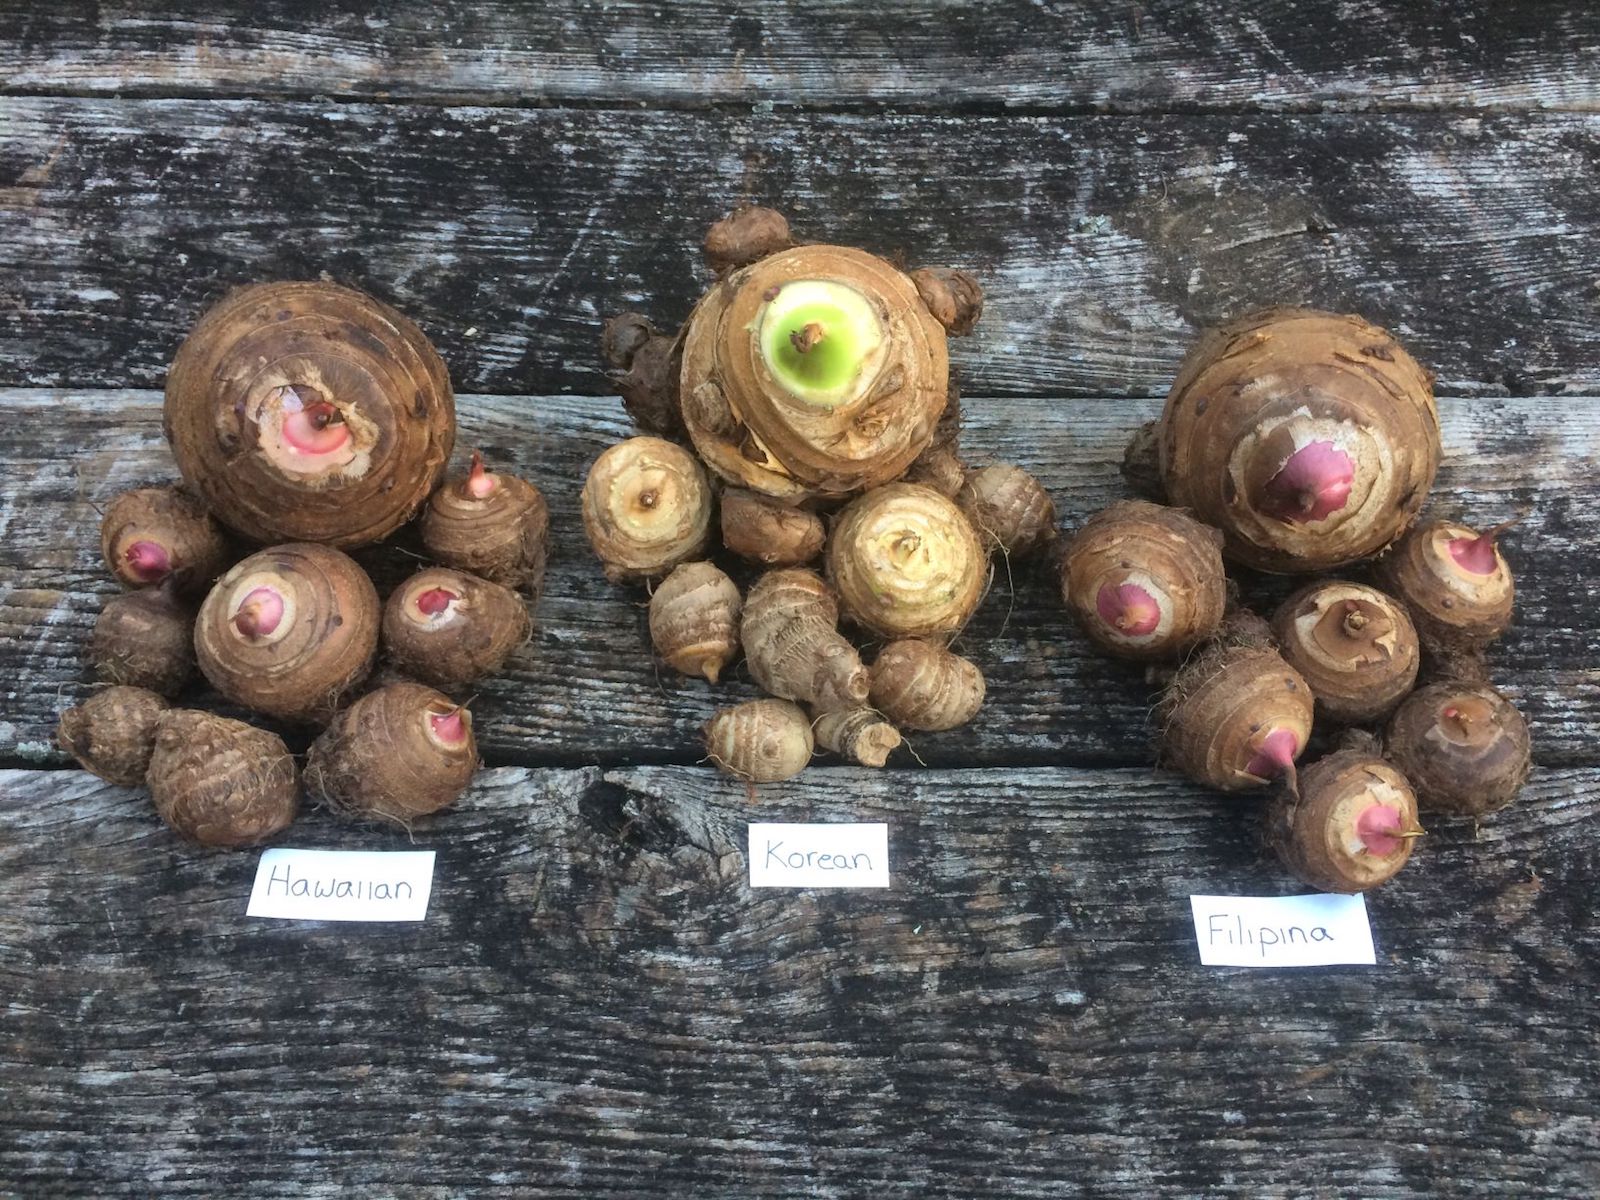 three piles of taro bulbs with labels